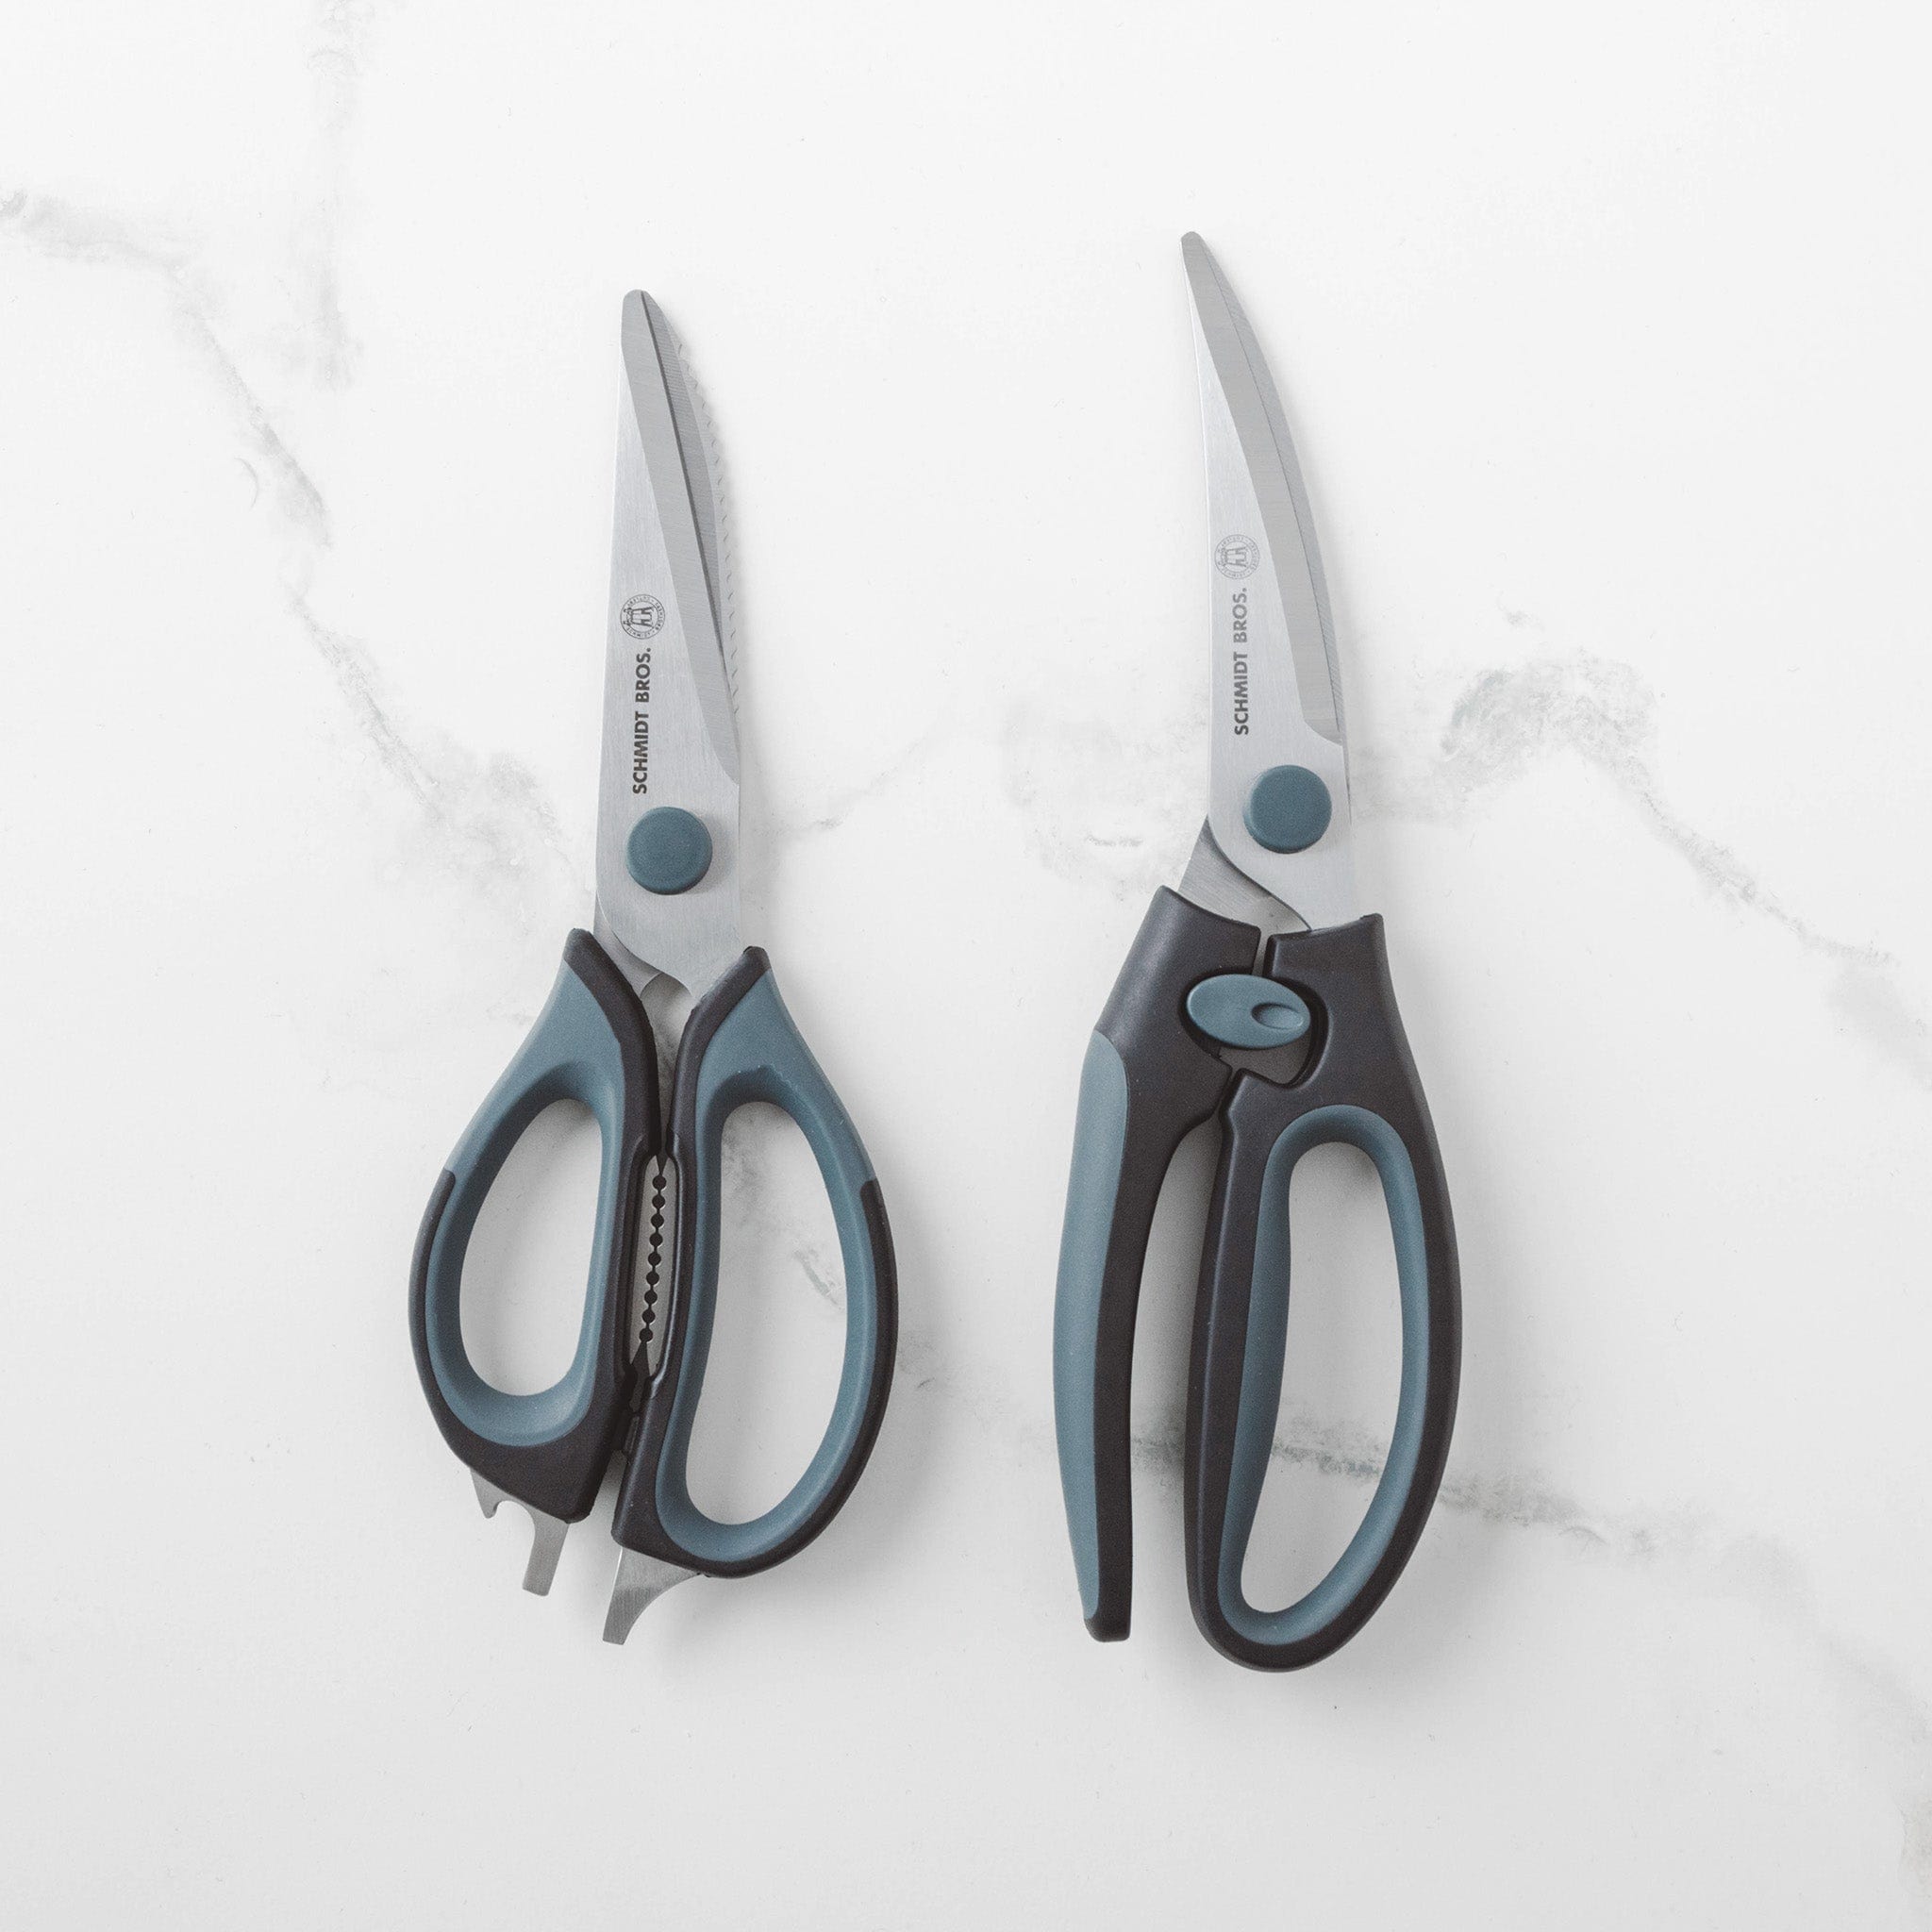 Beautiful 2-Piece All-Purpose Stainless Steel Shears in White, by